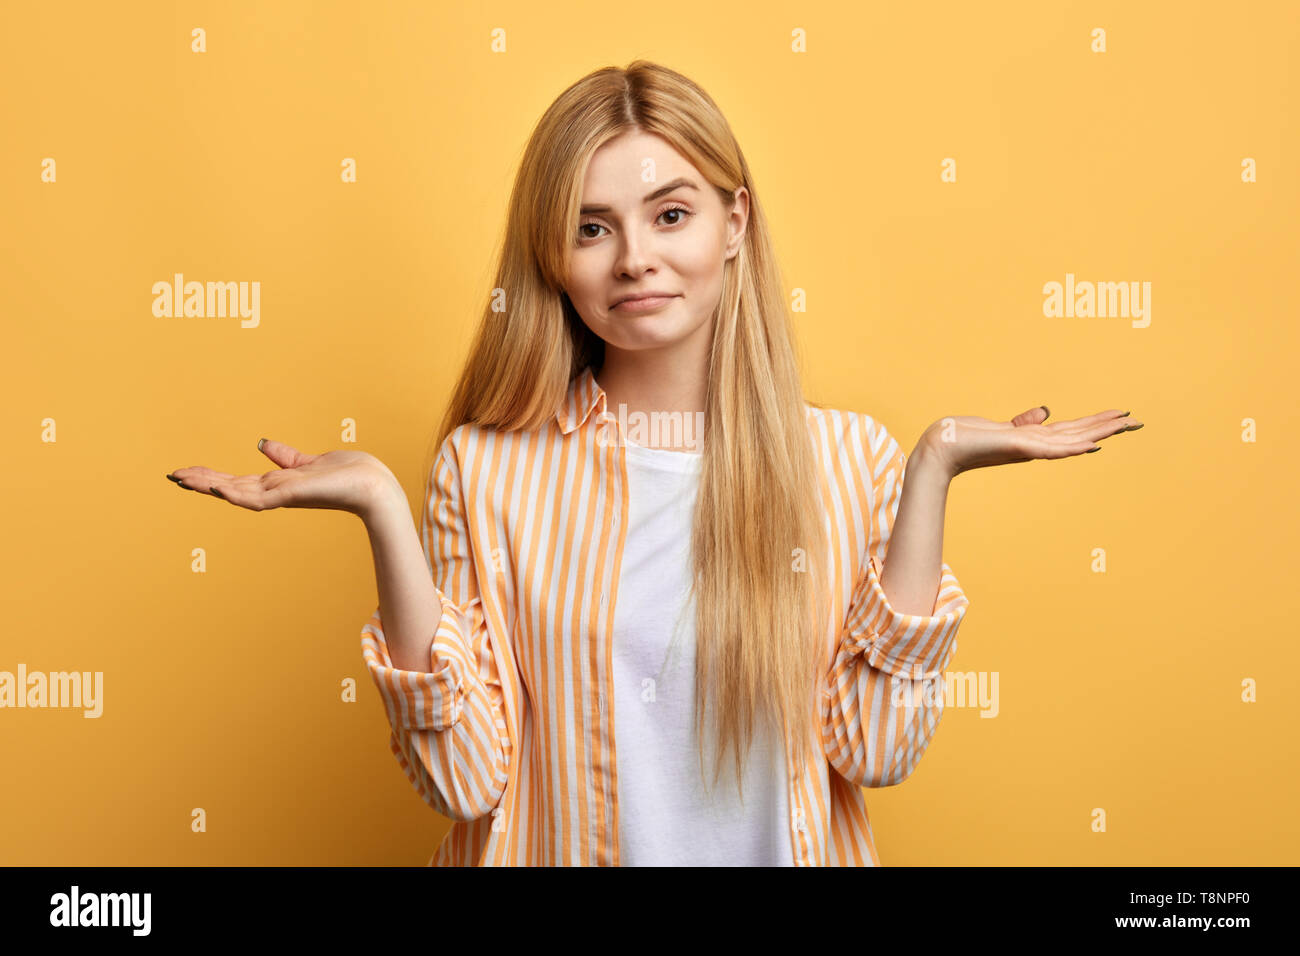 Puzzled hesitant girl with long fair hair dressed casually, shrugs  shoulders as doesn t know answer, to be or not to  yellow  background Stock Photo - Alamy